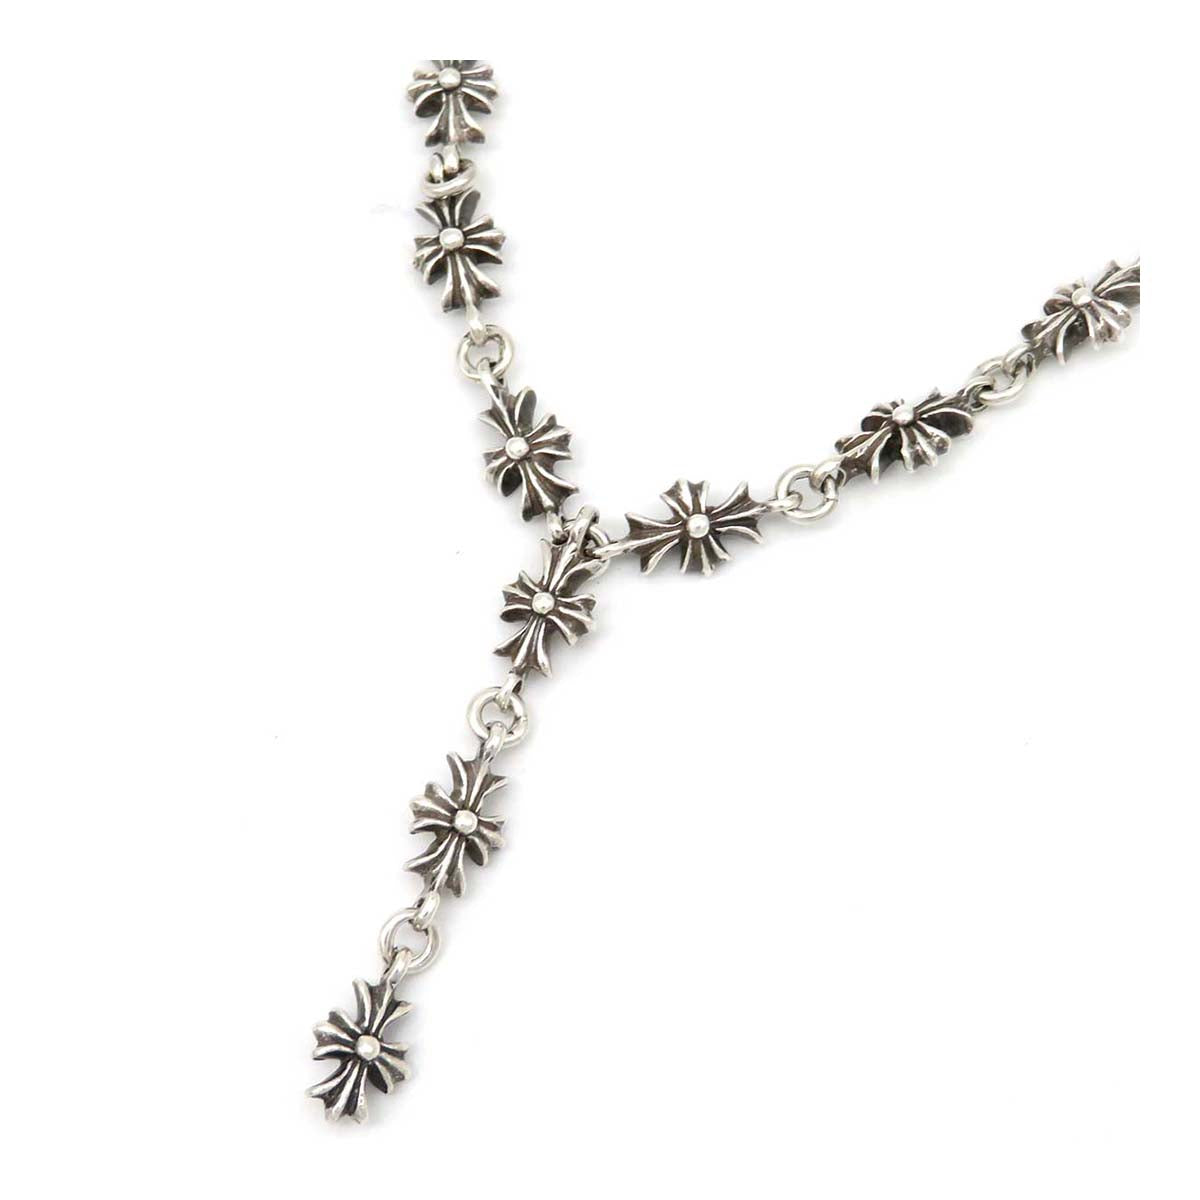 Tiny Cross Chain Silver Necklace